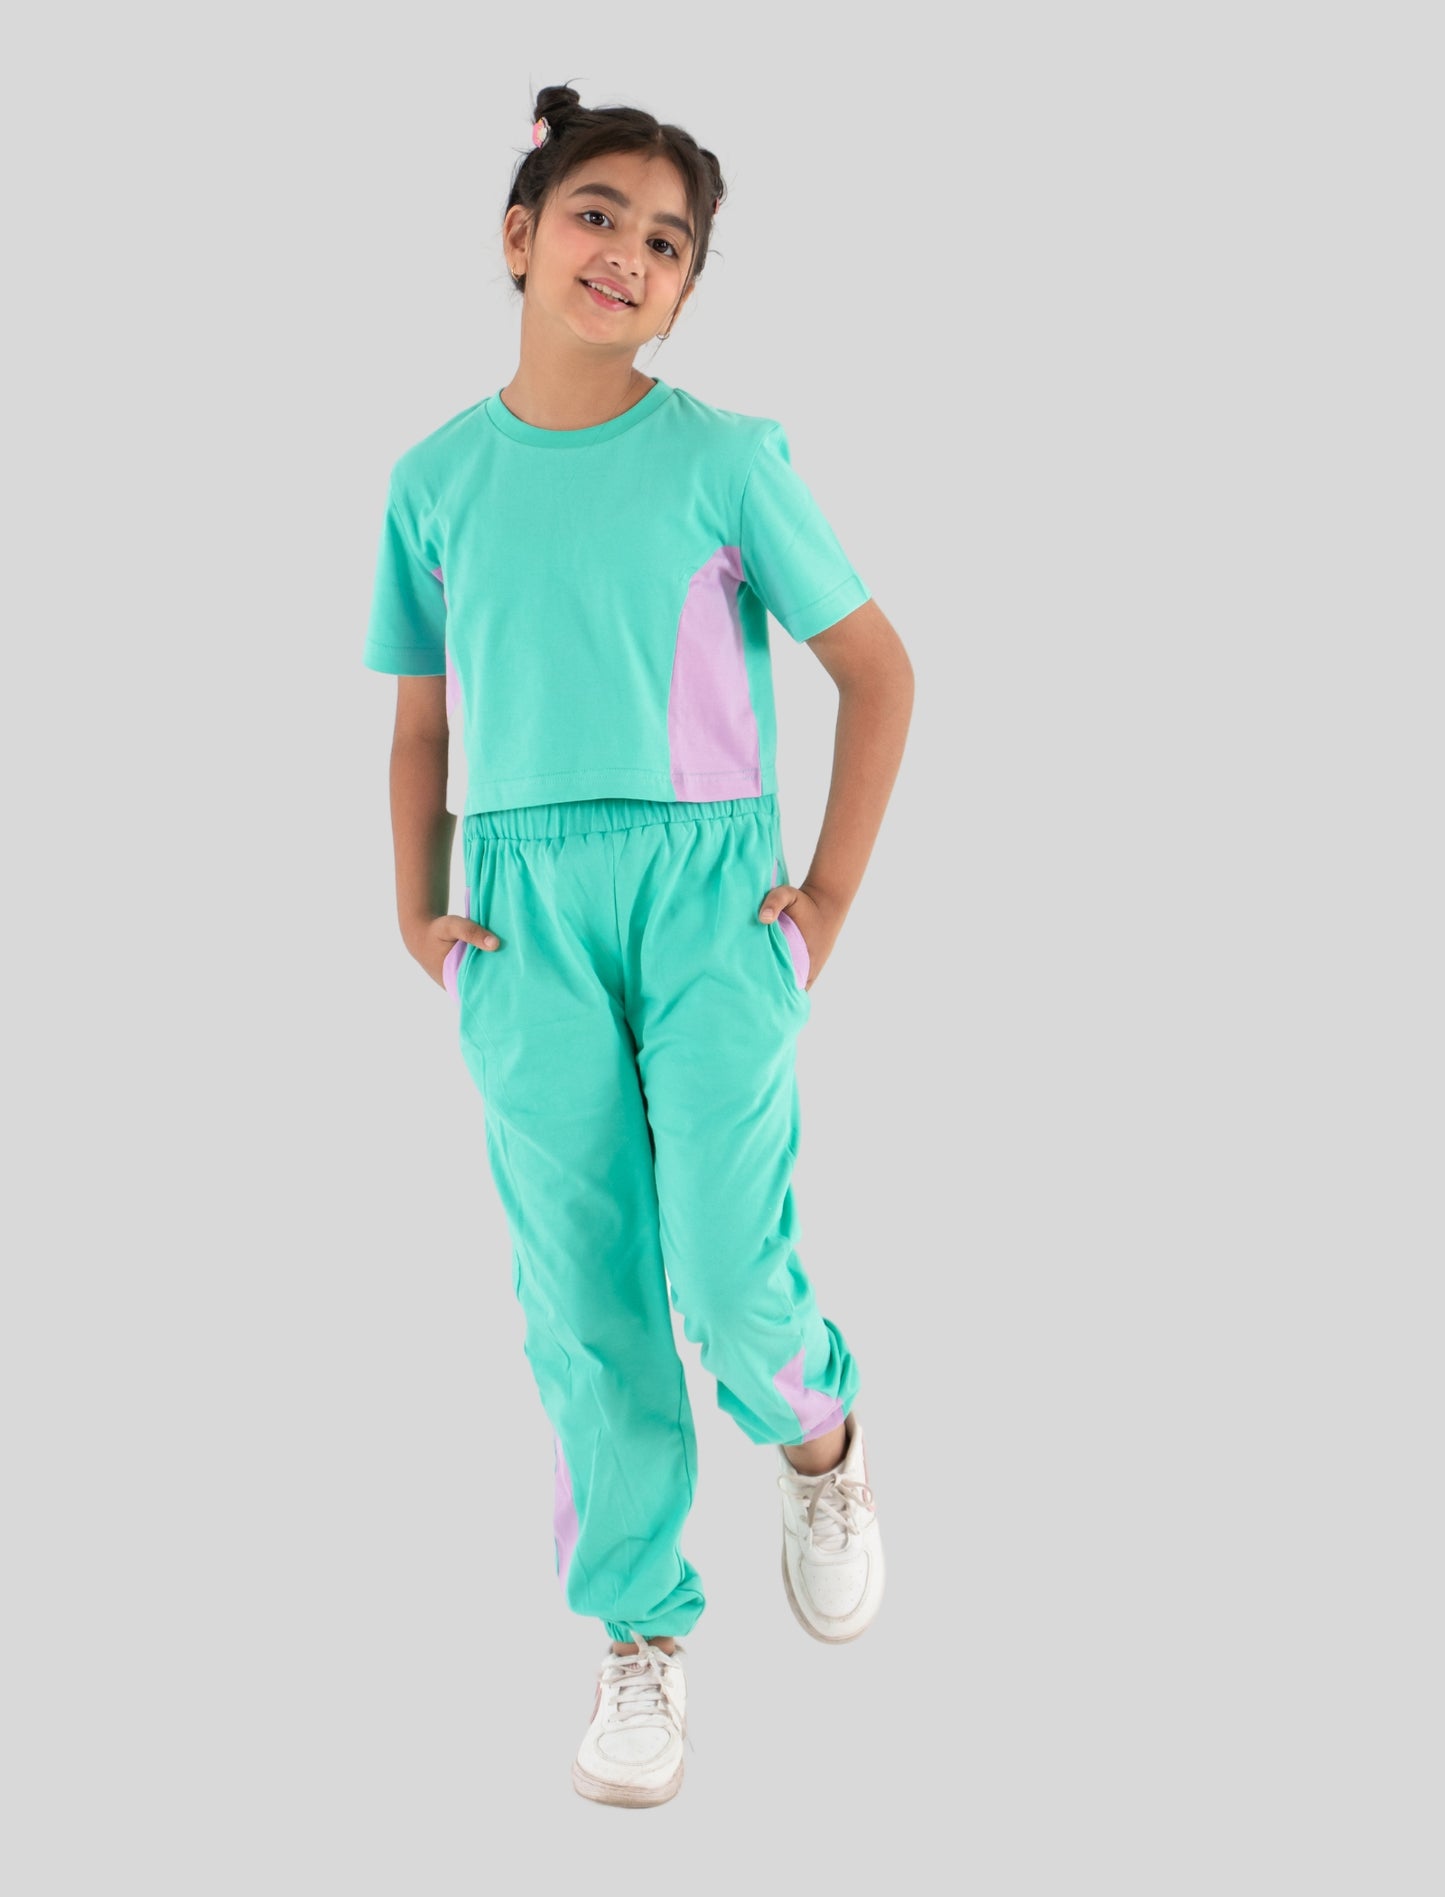 Girls Kids Co-ord Set  Jogger Pant with Crop Top For Summer Wear (Sea Green)